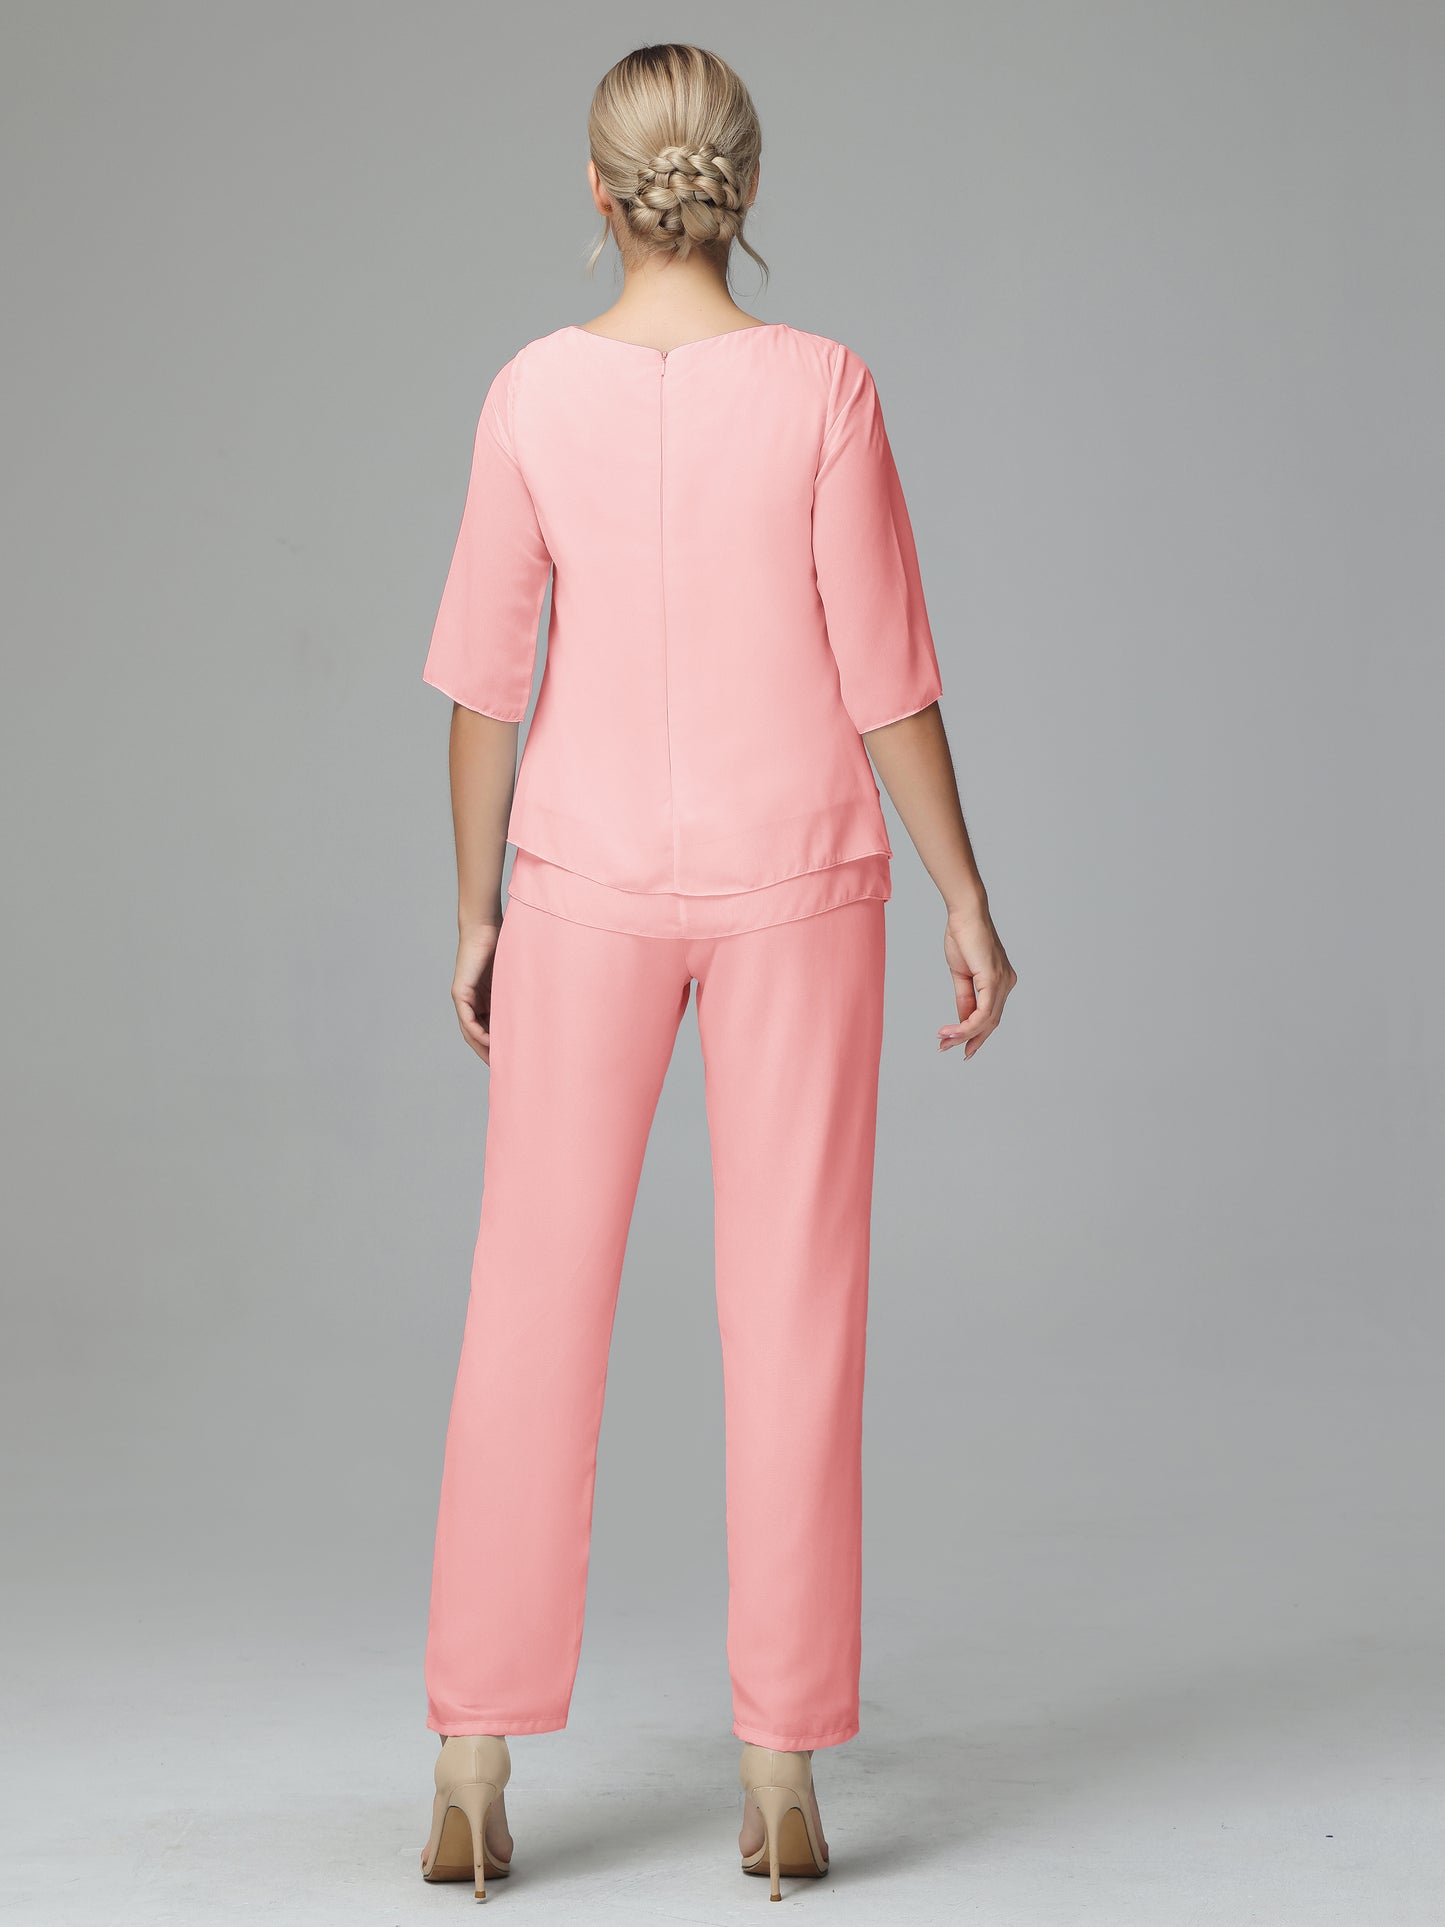 Simple Chiffon Half Sleeves Mother Of The Bride Dress Pants Suits